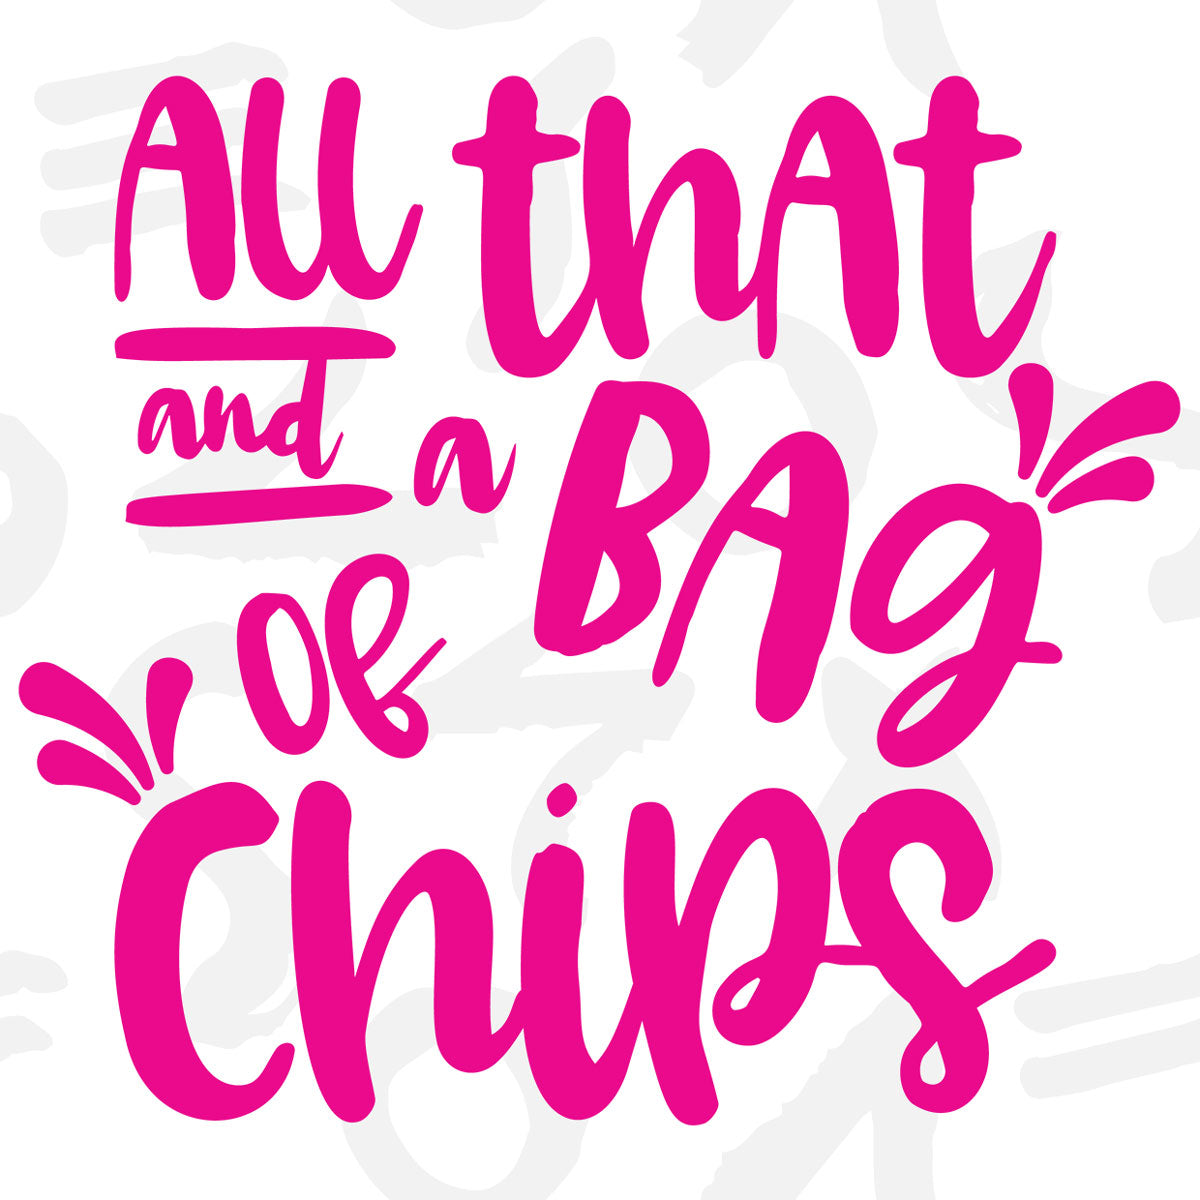 freebie-friday-all-that-and-a-bag-of-chips-svg-file-kelly-lollar